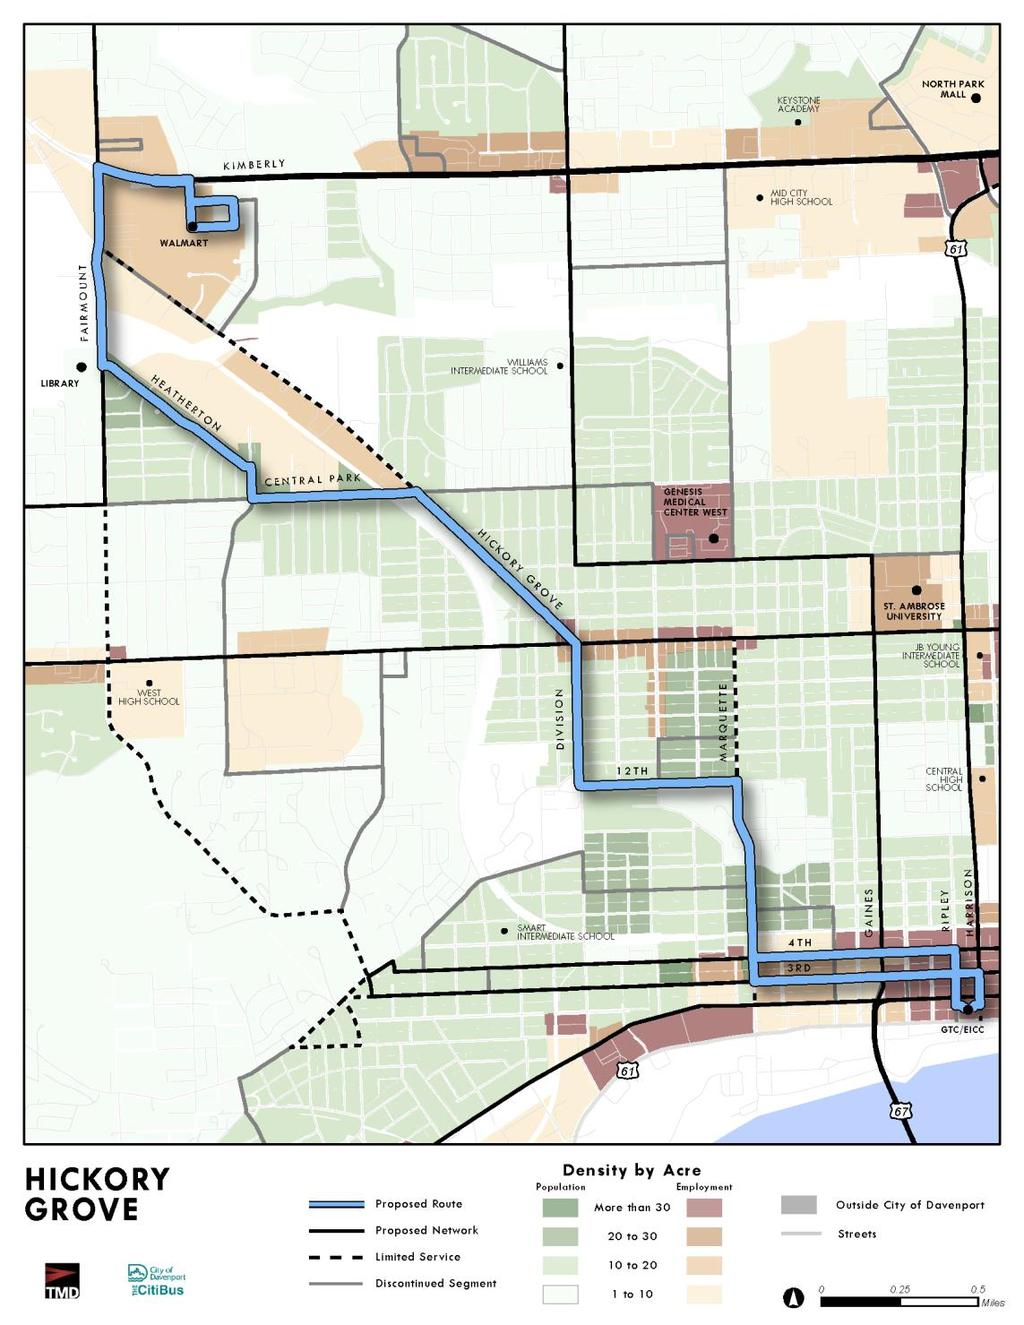 City of Davenport CitiBus Hickory Grove The proposed Hickory Grove route is very similar to the existing CitiBus Route 9.